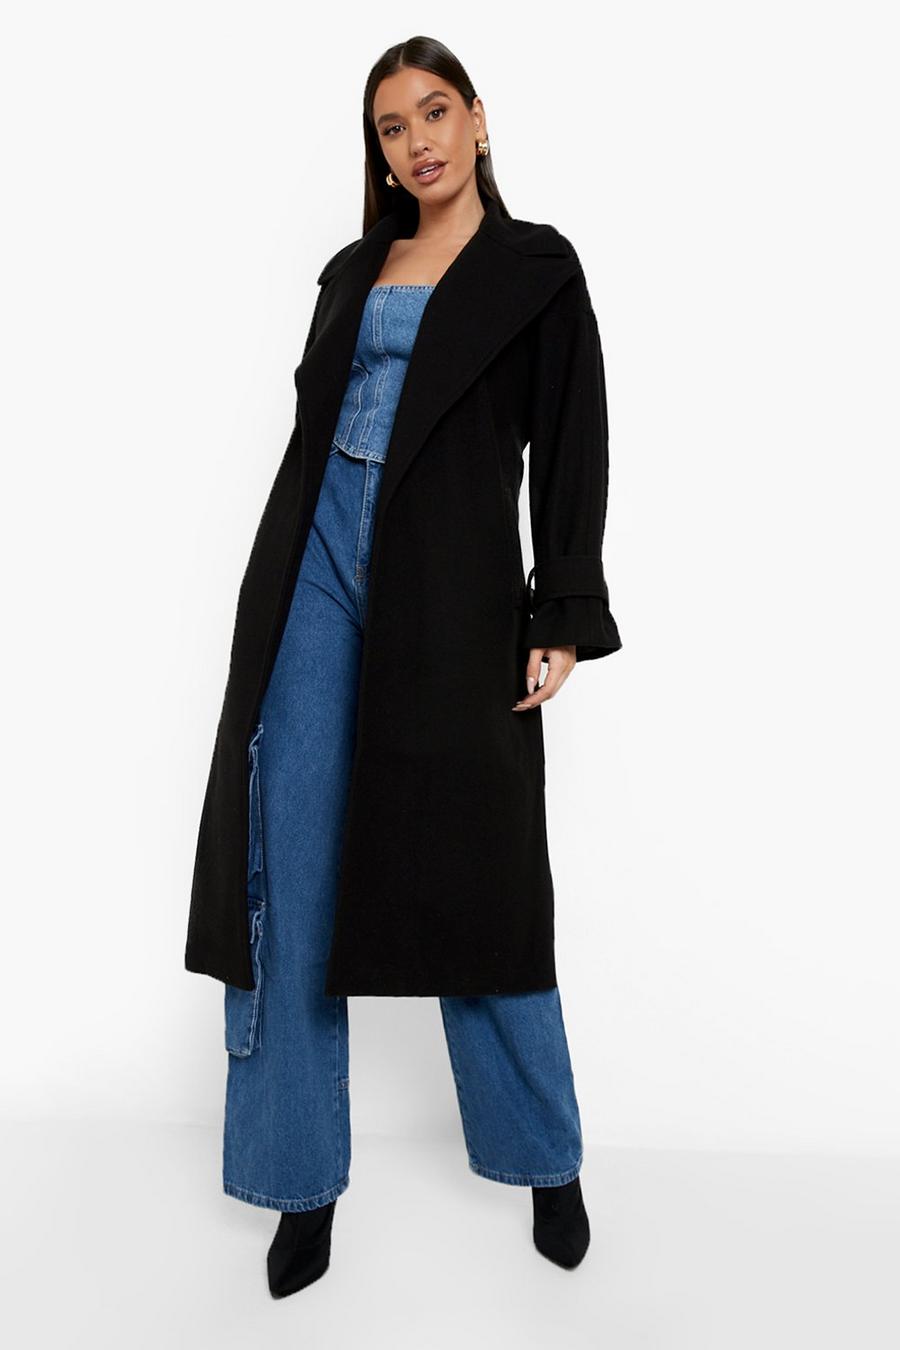 Black Wool Look Trench